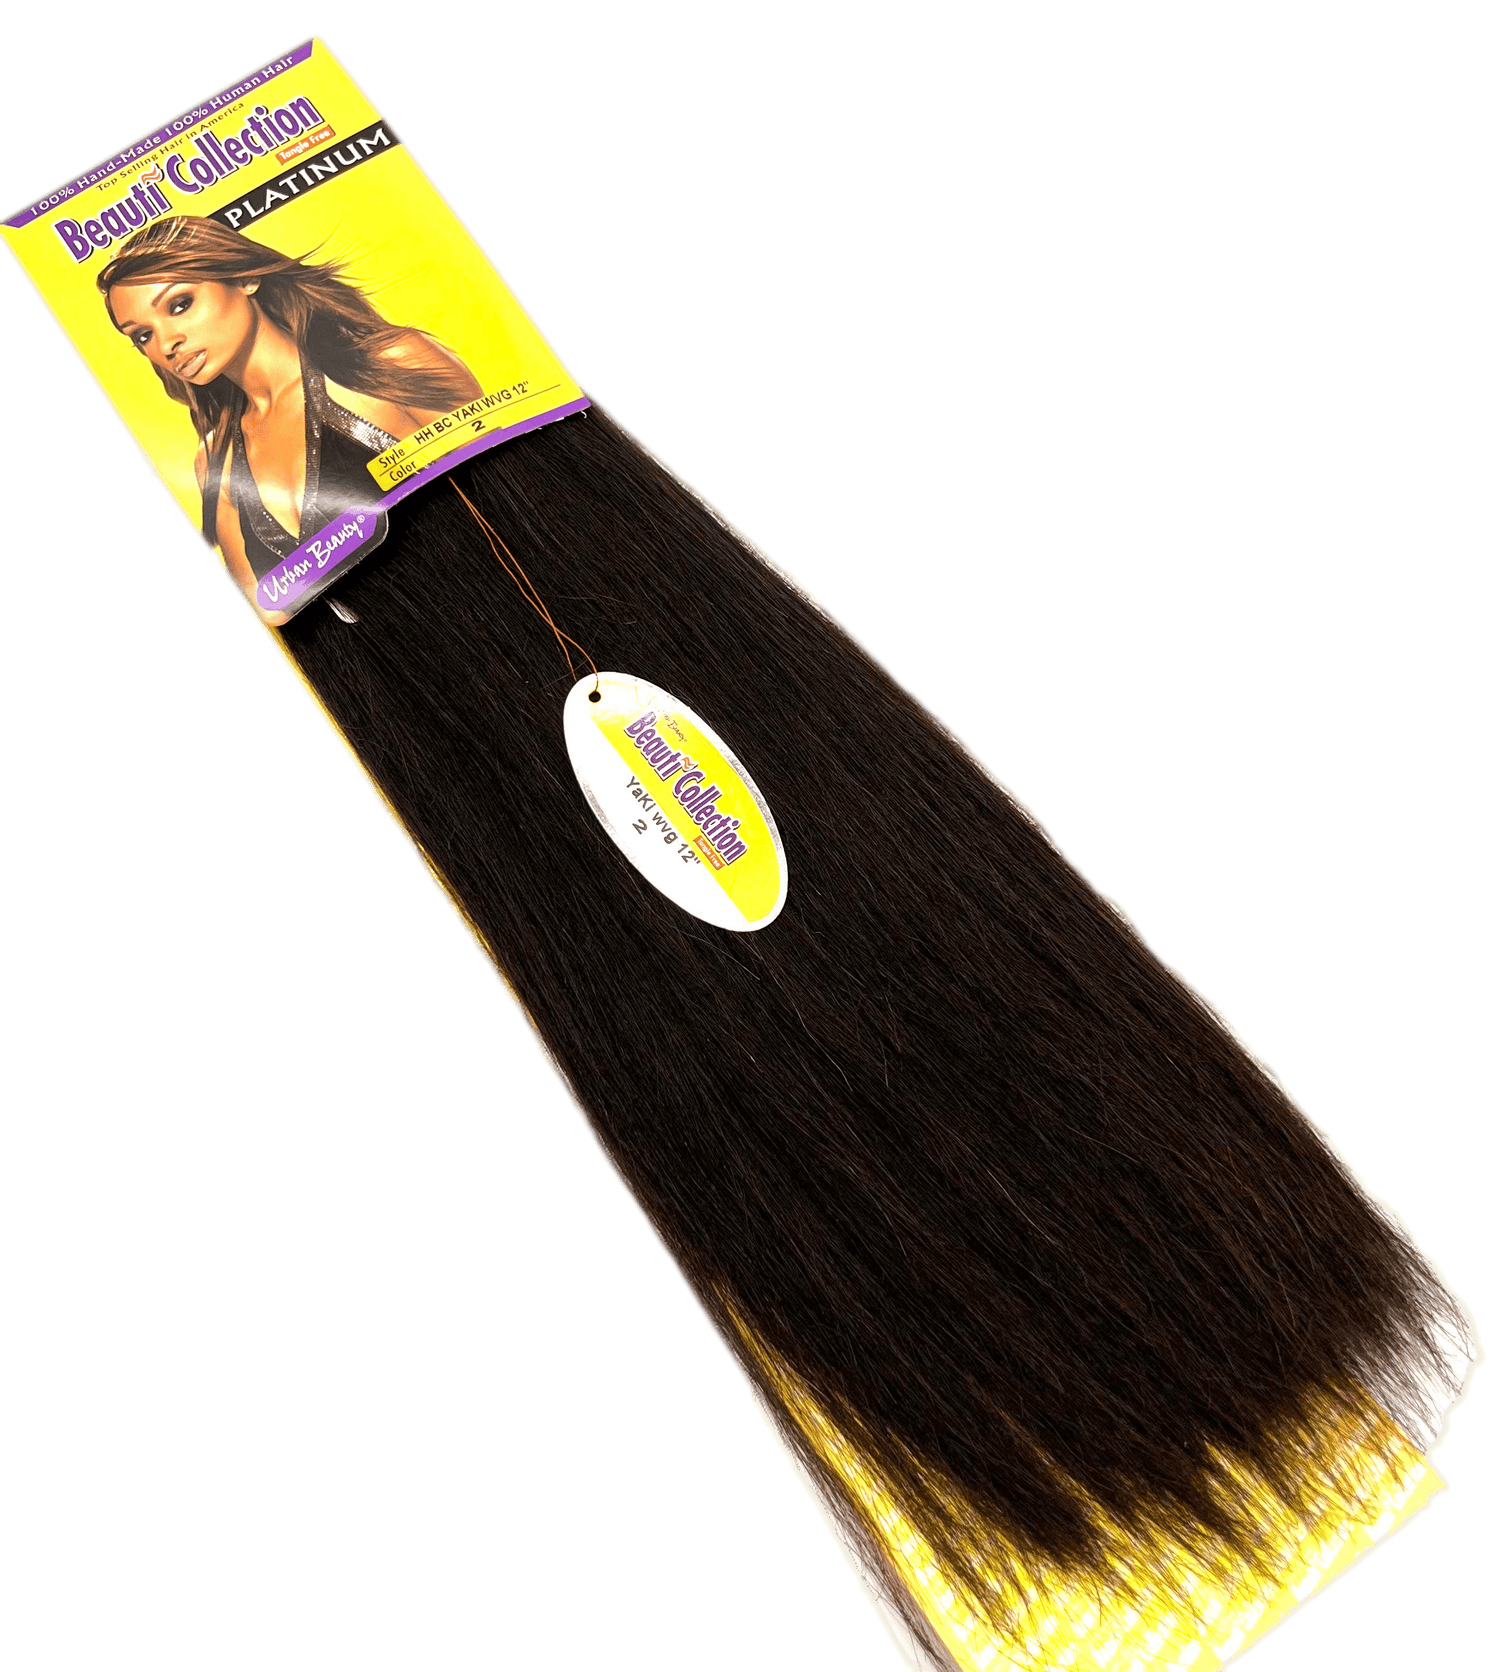 Beauti Collection Human Hair Weave -Yaki Weave - VIP Extensions